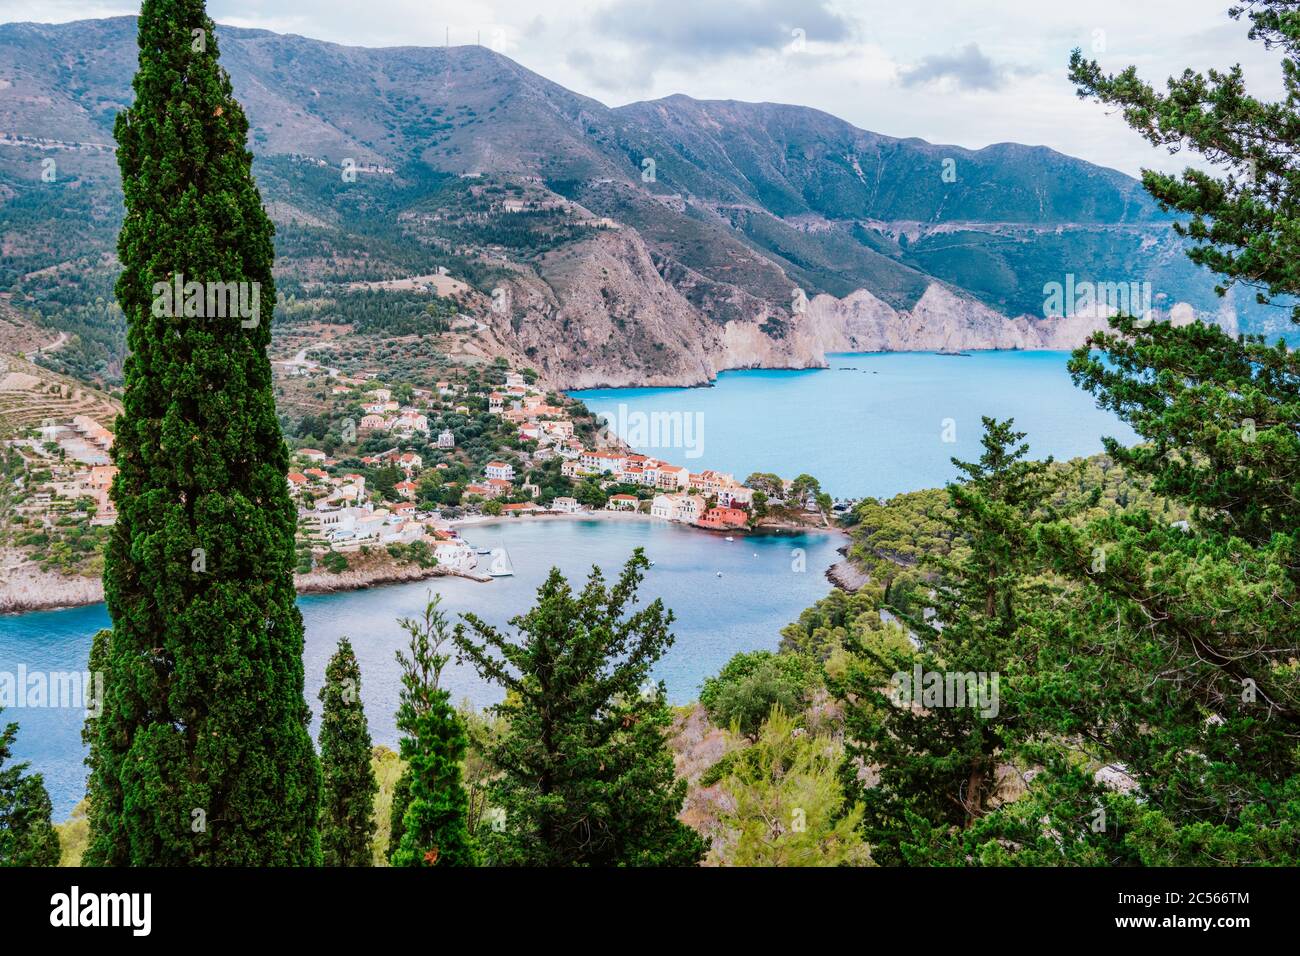 Frourio peninsula and Assos village with beautiful sea bay and cypress trees in foreground. Kefalonia island, Greece. Stock Photo